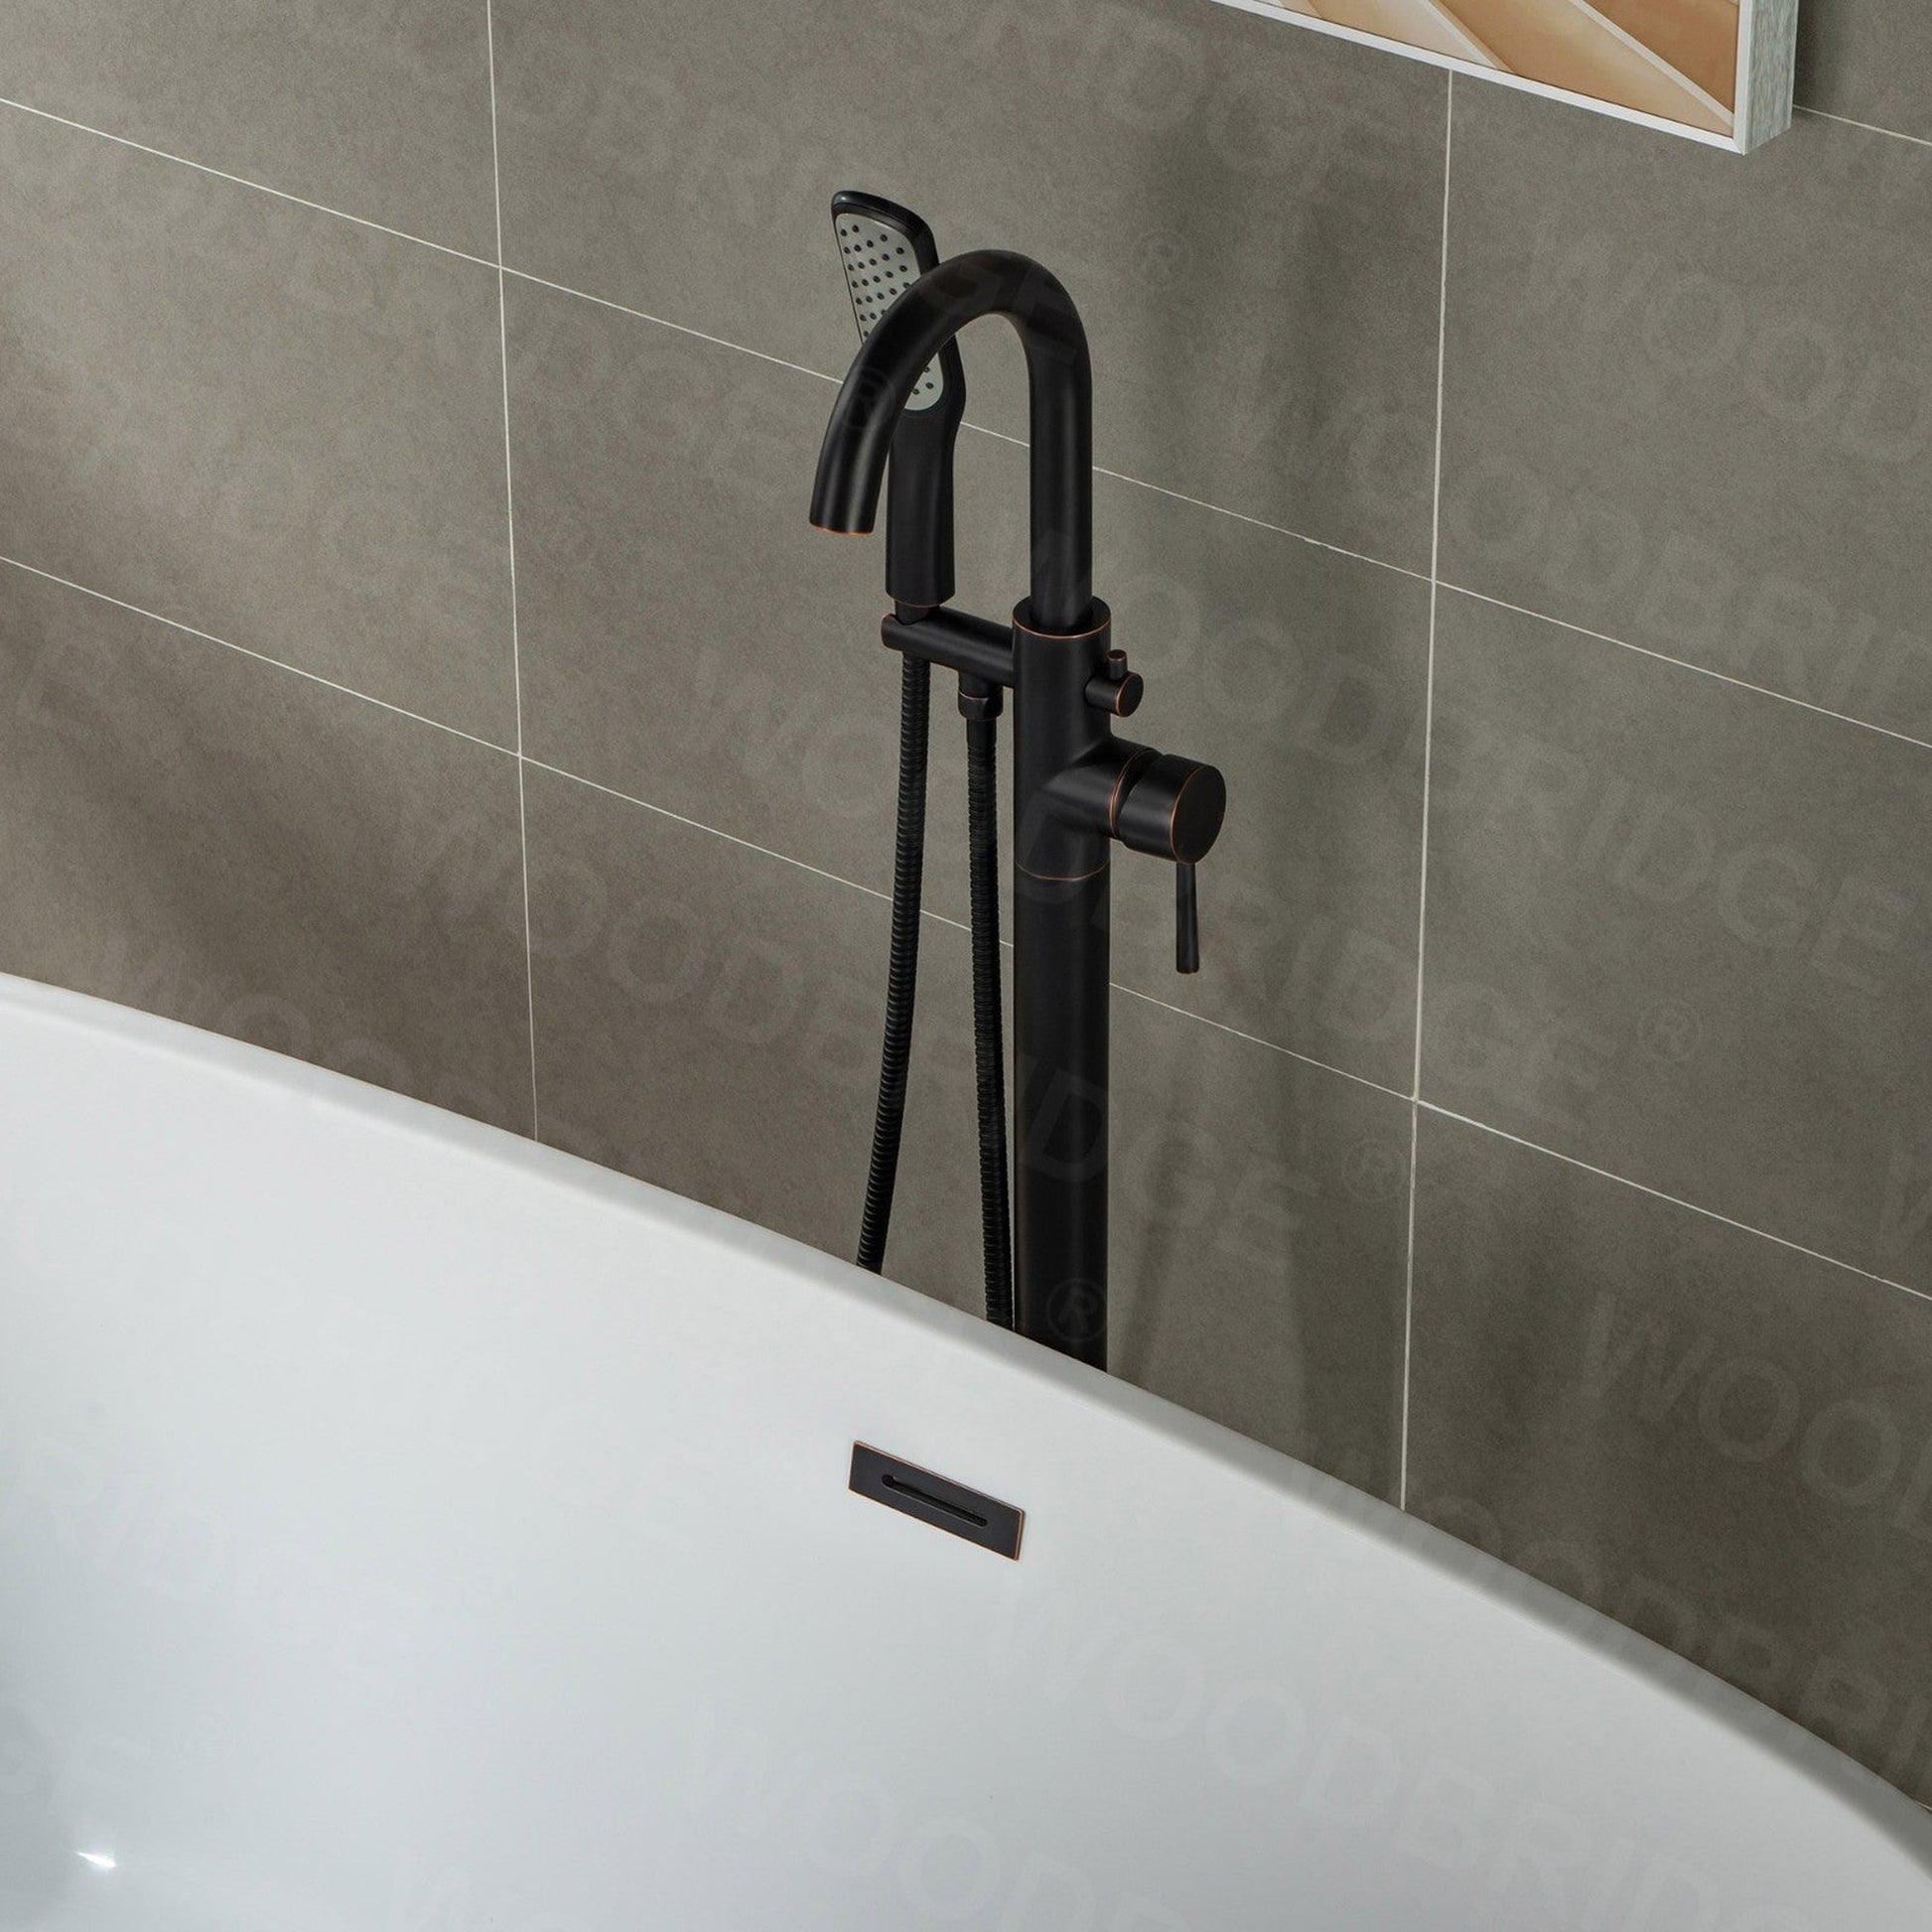 WoodBridge F0010ORBSQ Oil Rubbed Bronze Contemporary Single Handle Floor Mount Freestanding Tub Filler Faucet With Square Shape Comfort Grip Hand Shower